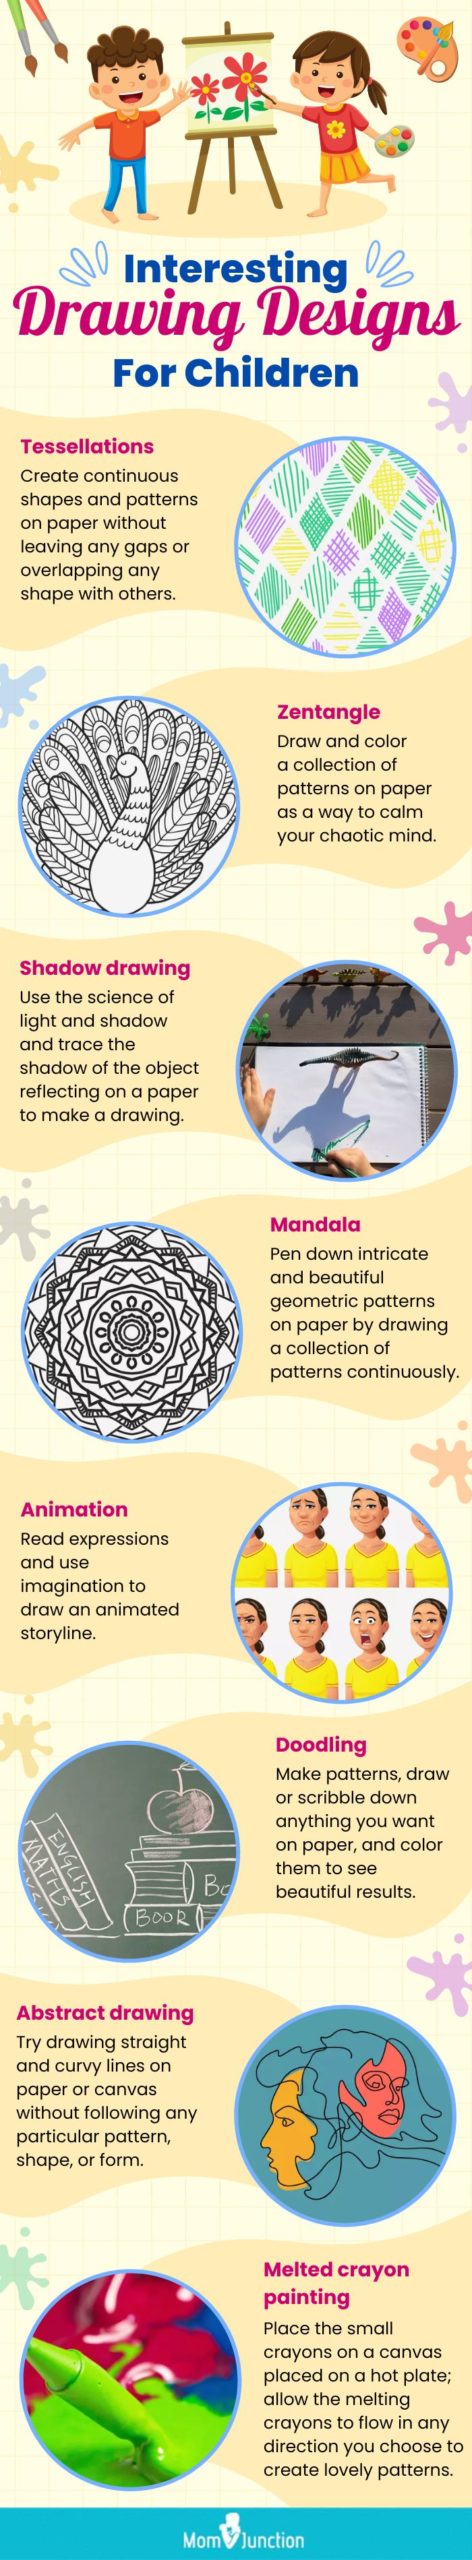 interesting drawing designs for children (infographic)